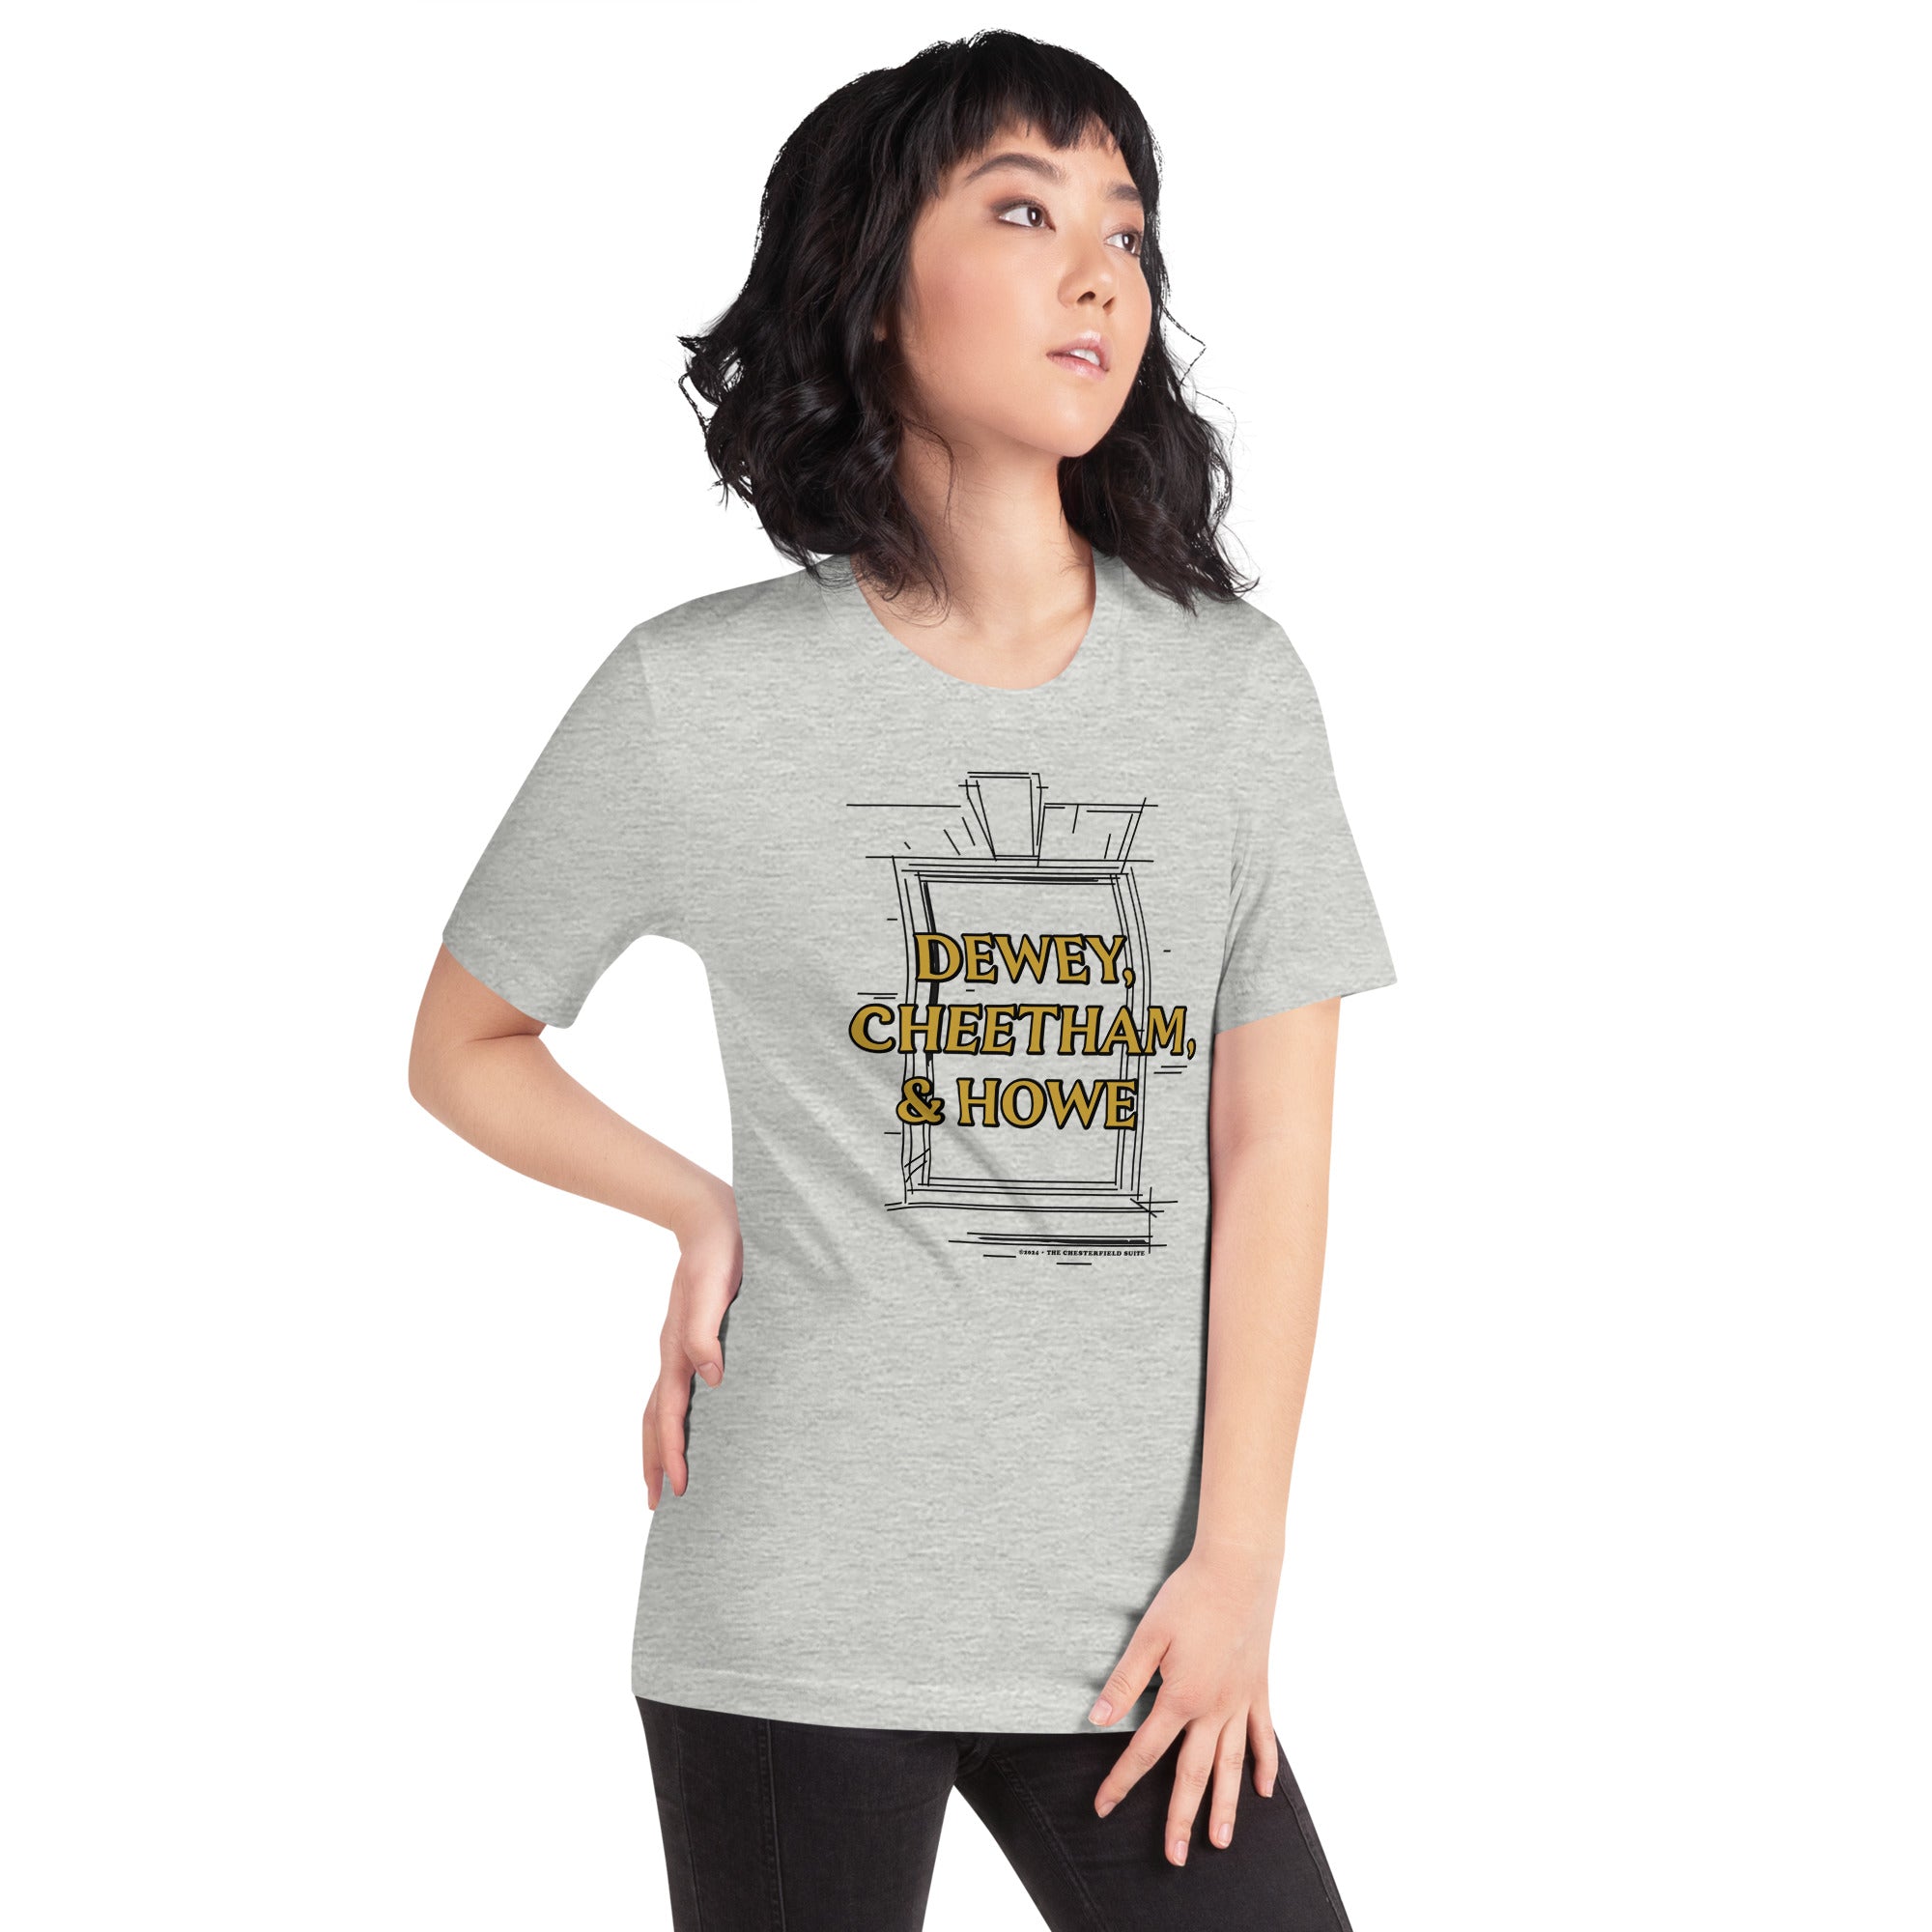 woman wearing Light grey unisex t-shirt with Dewey Cheetham & Howe from Harvard square written on in gold